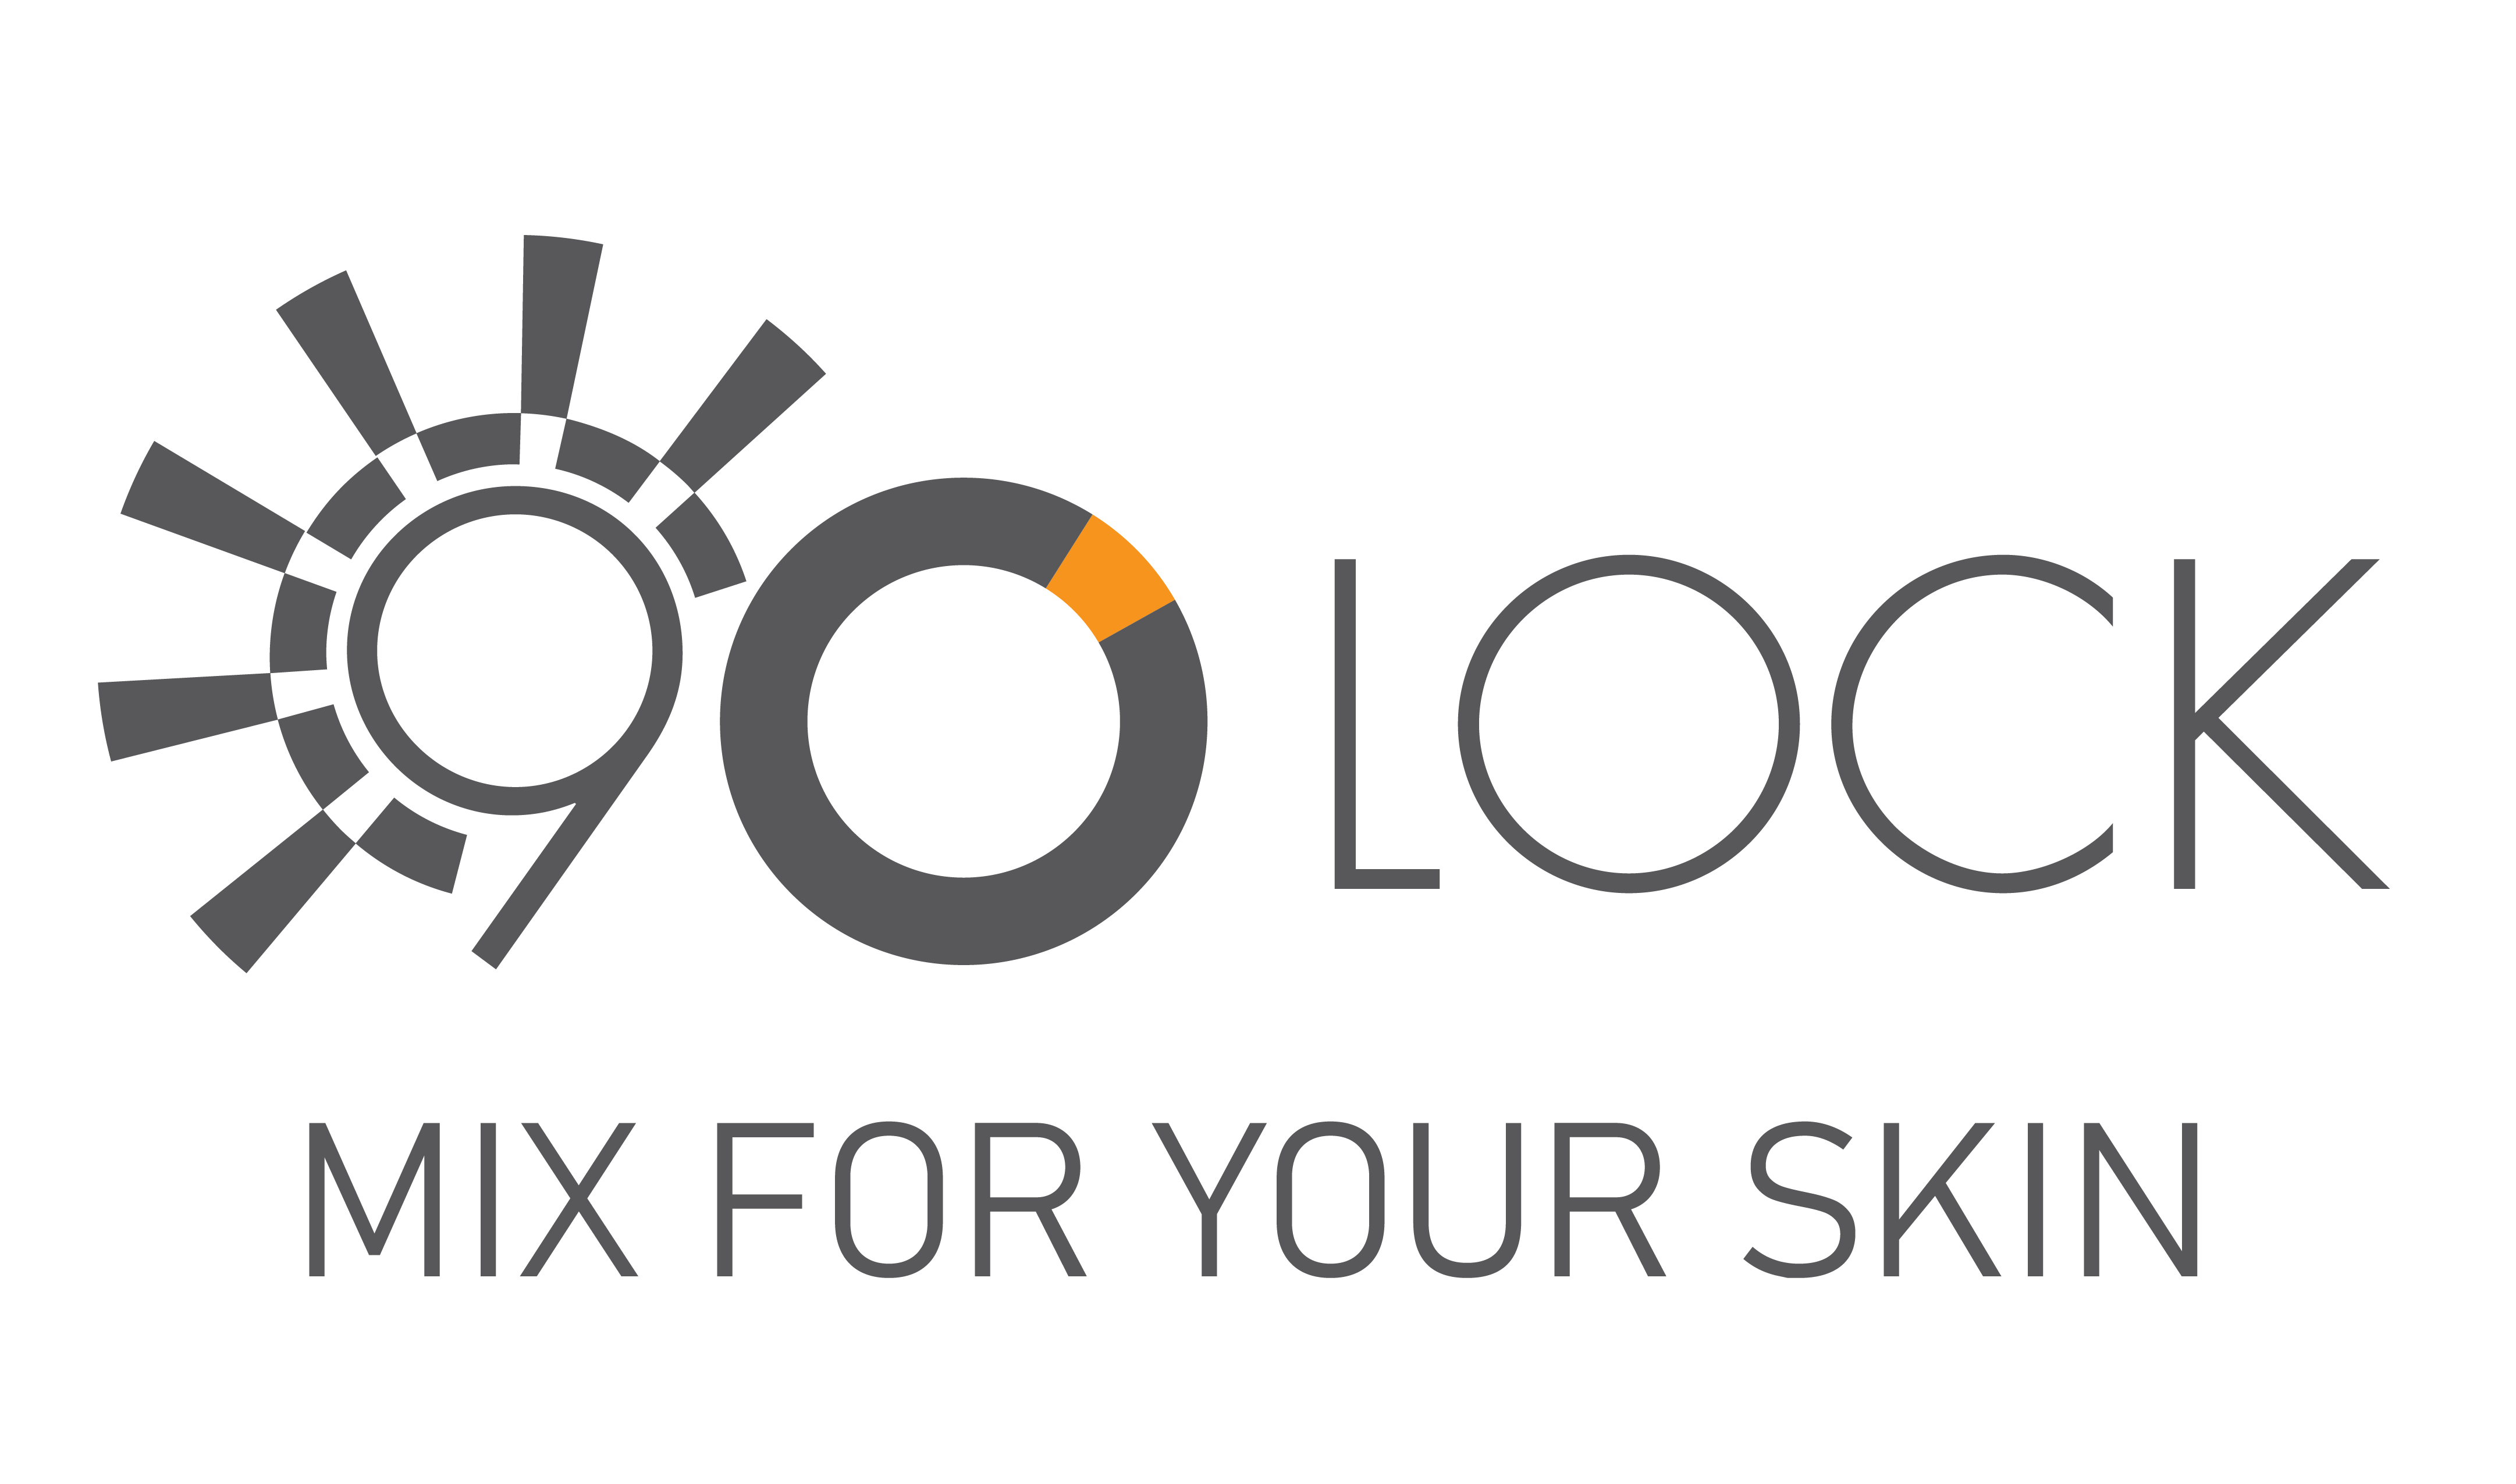 90 LOCK - MIX FOR YOUR SKIN